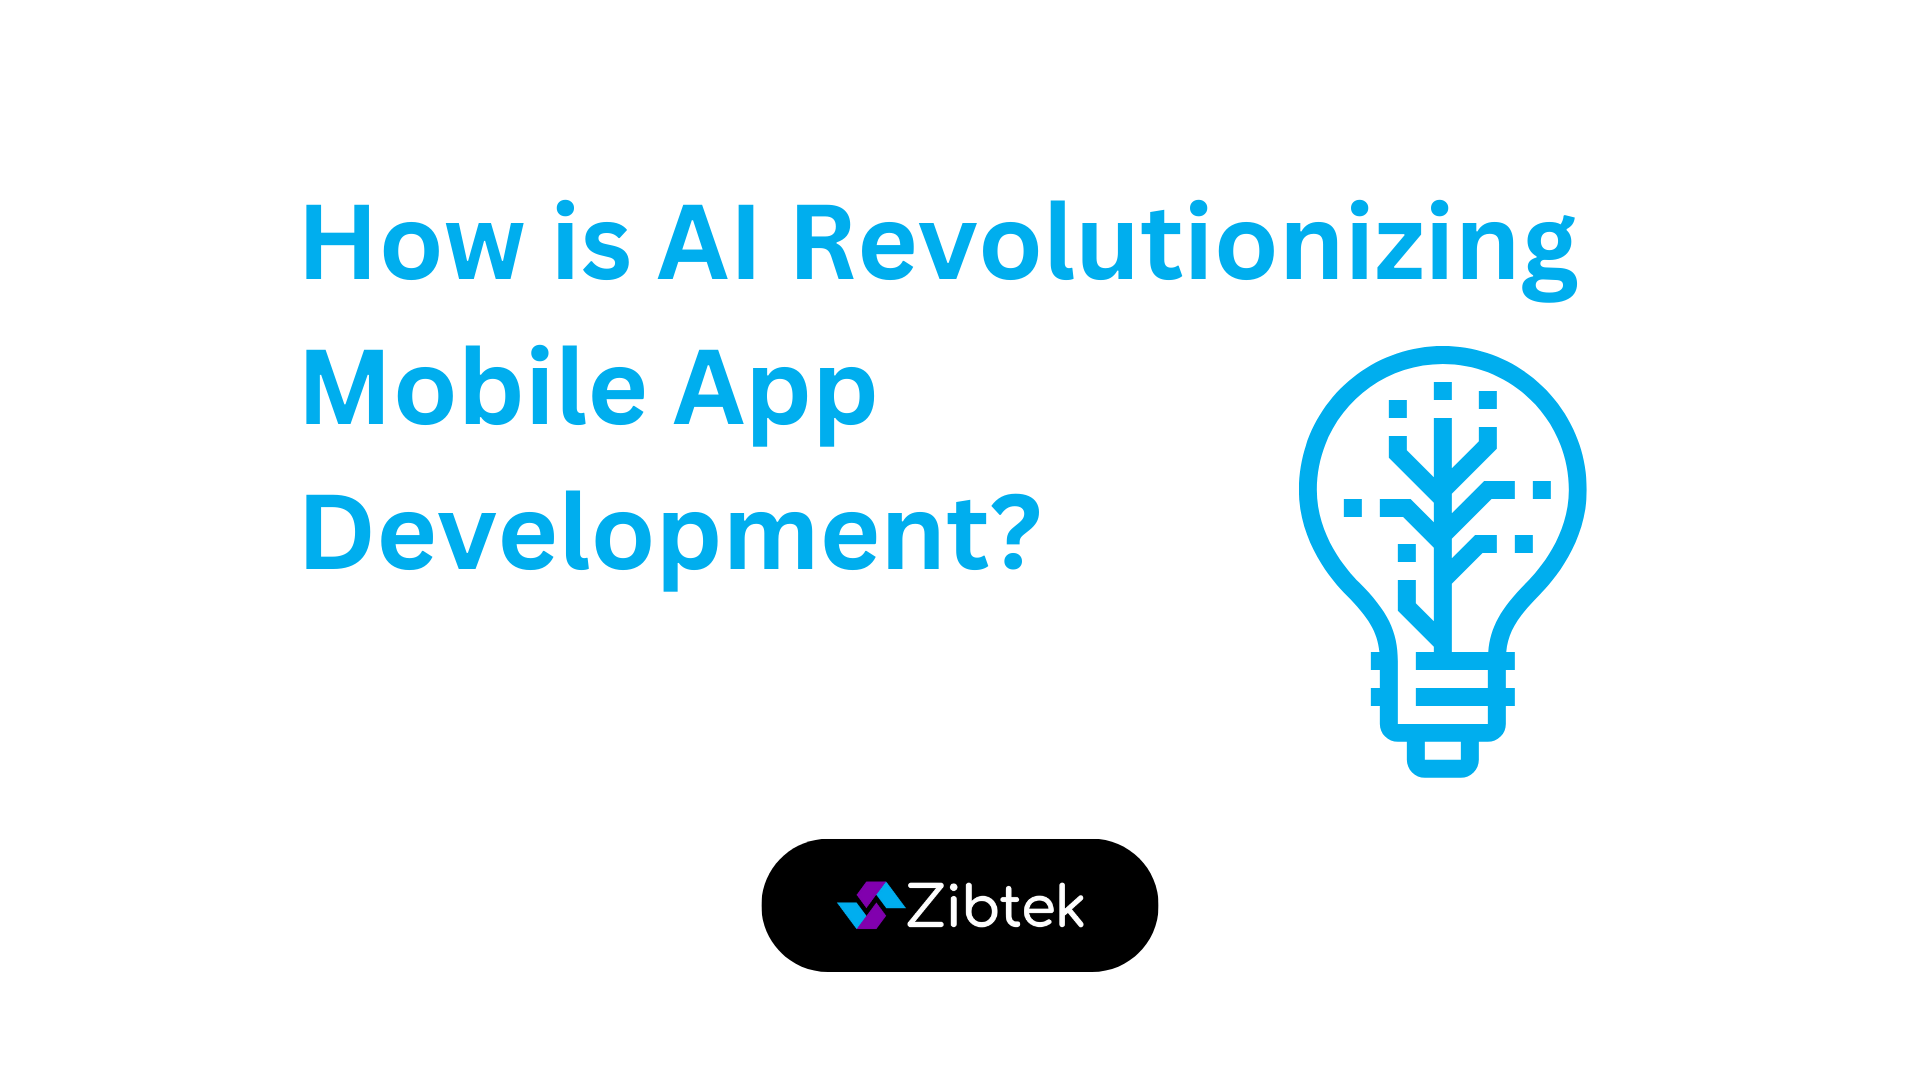 Light bulb with text how AI is revolutionizing mobile app development